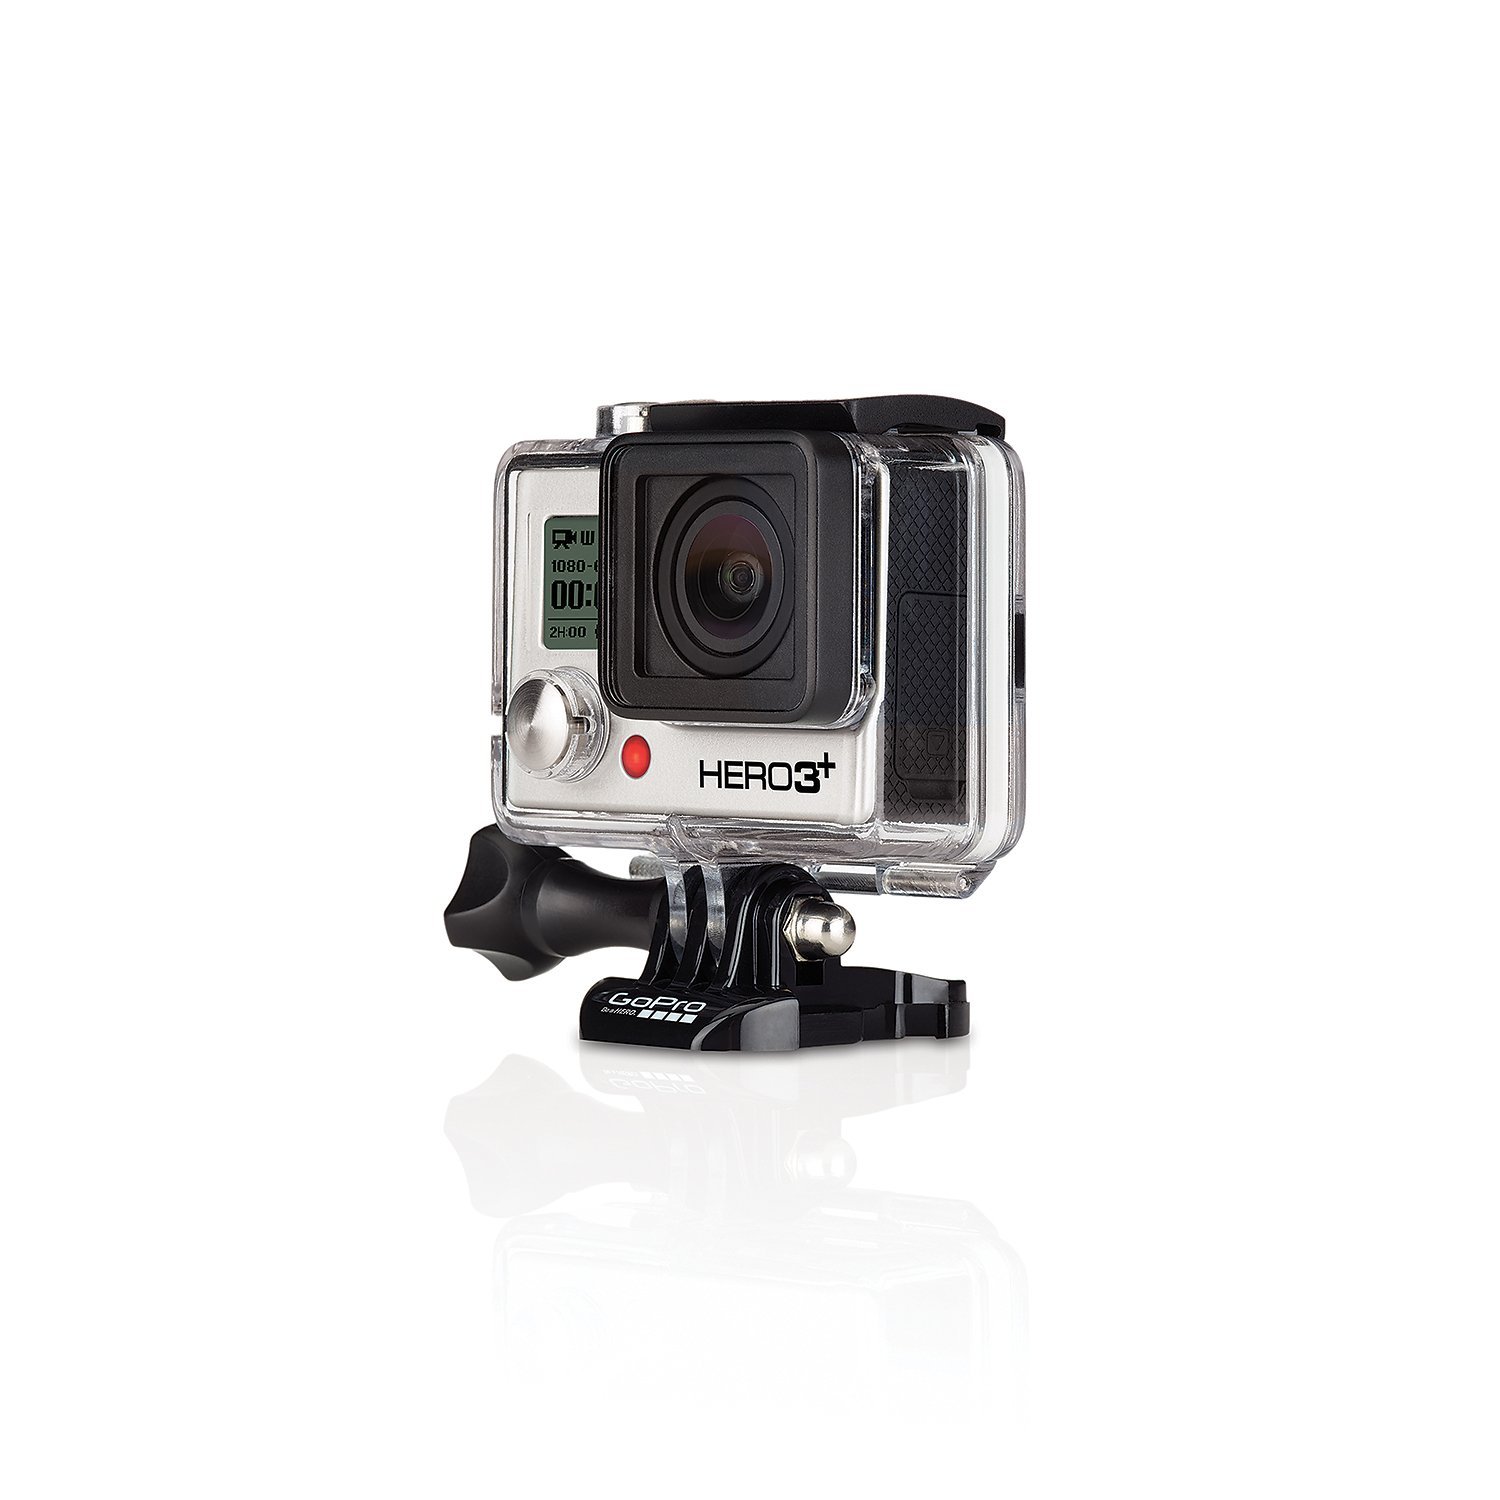 Update Your GoPro HERO3+ Black Edition Action Camera - Firmware 3.00